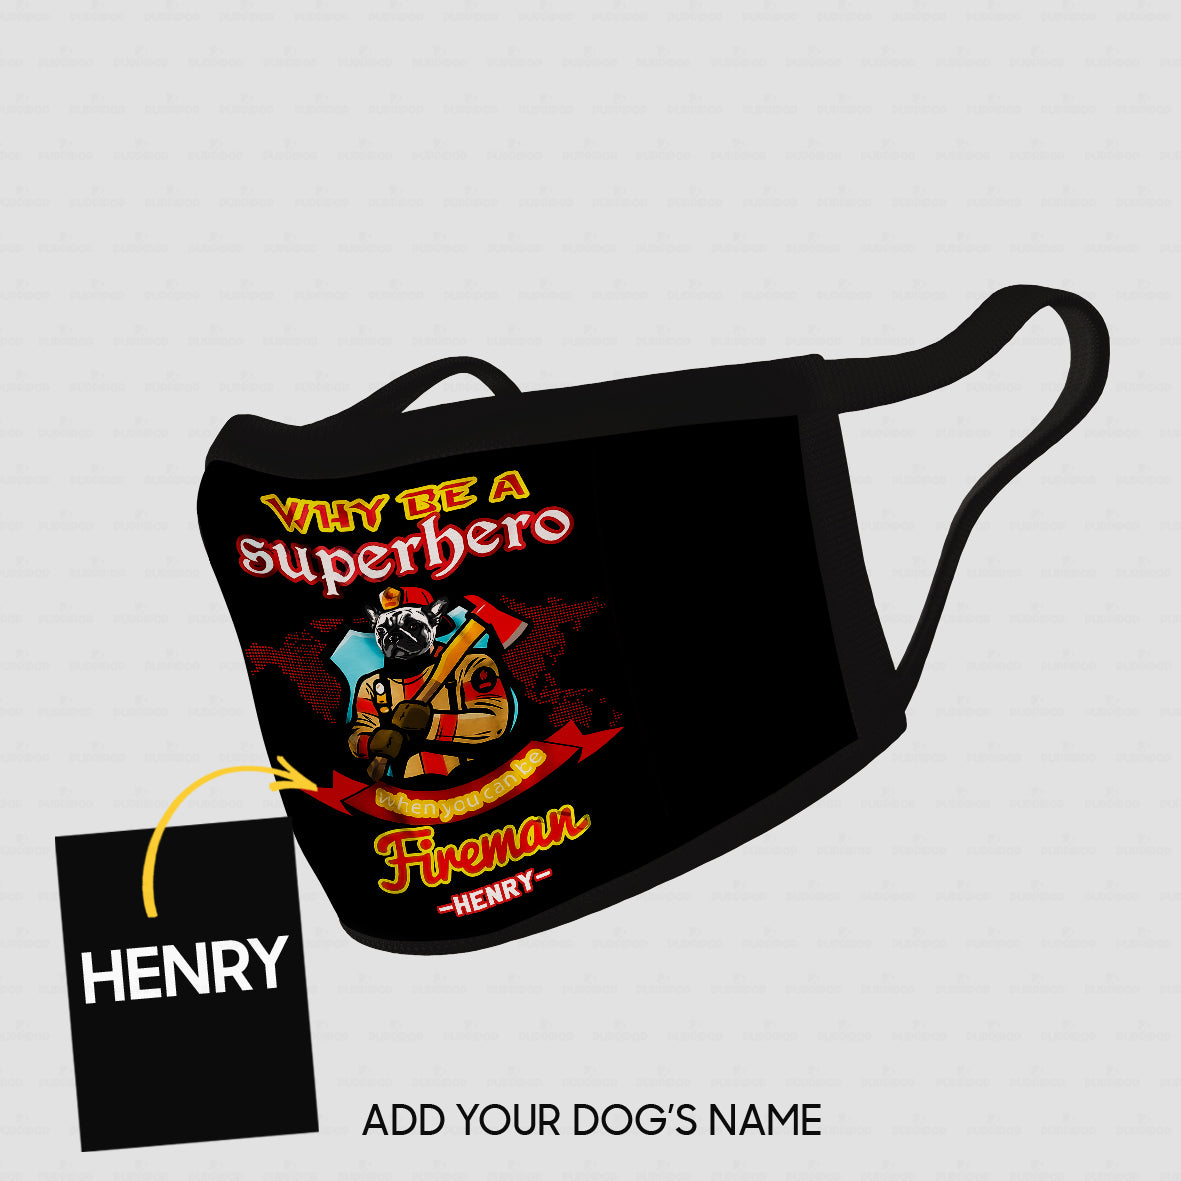 Personalized Dog Mask Gift Idea - Why Be A Fireman Superhero For Dog Lovers - Cloth Mask